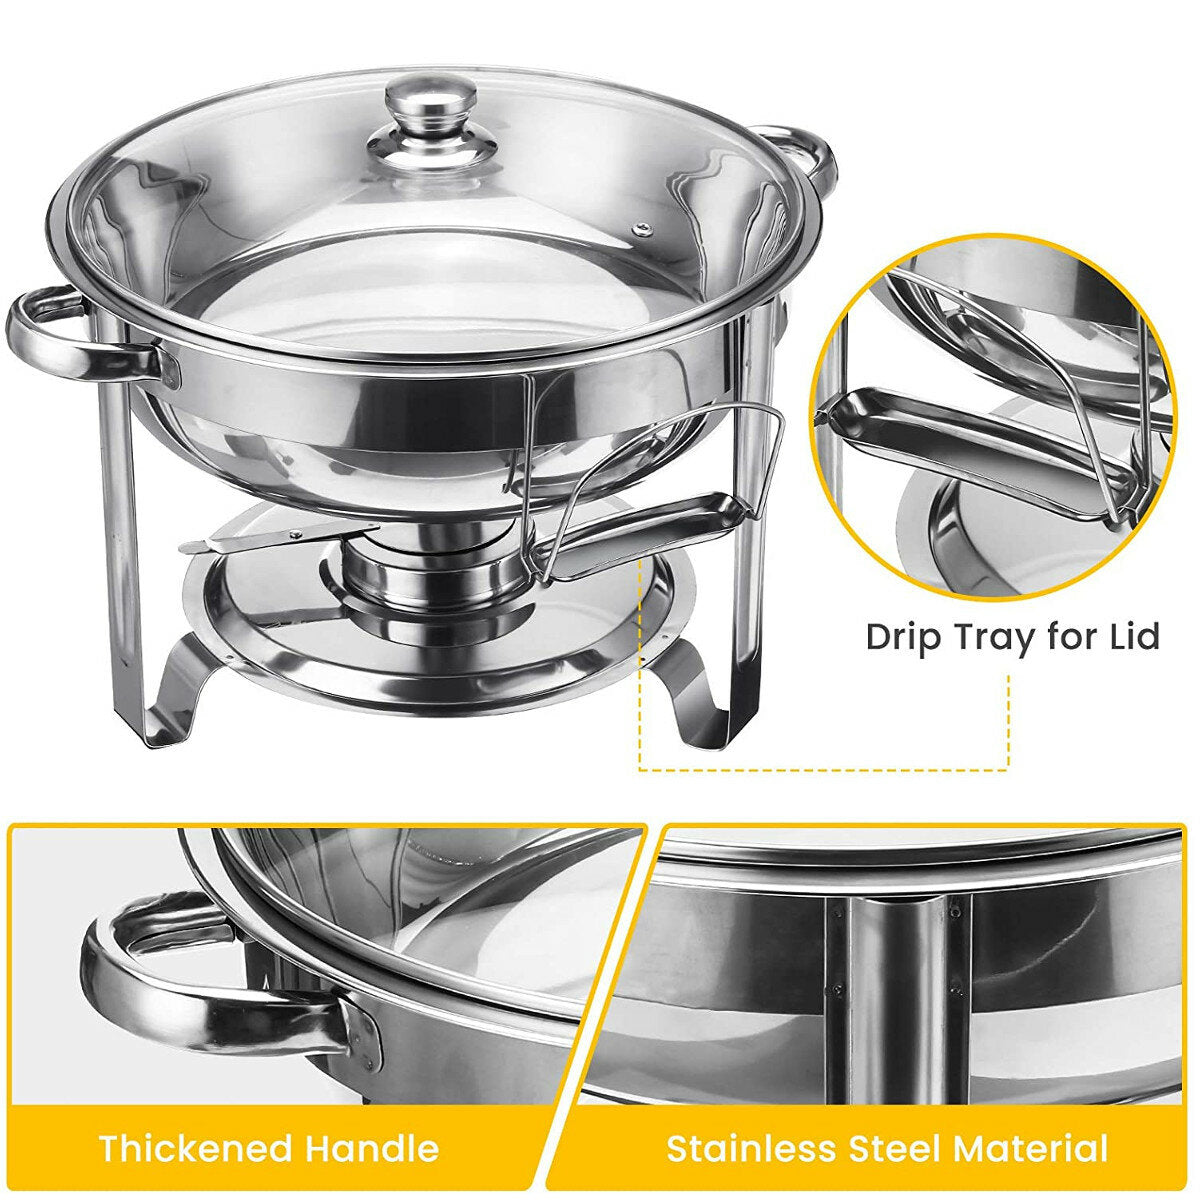 2pcs Set Stainless Steel Dining Stove 2 Pack 4 Litre Cooker